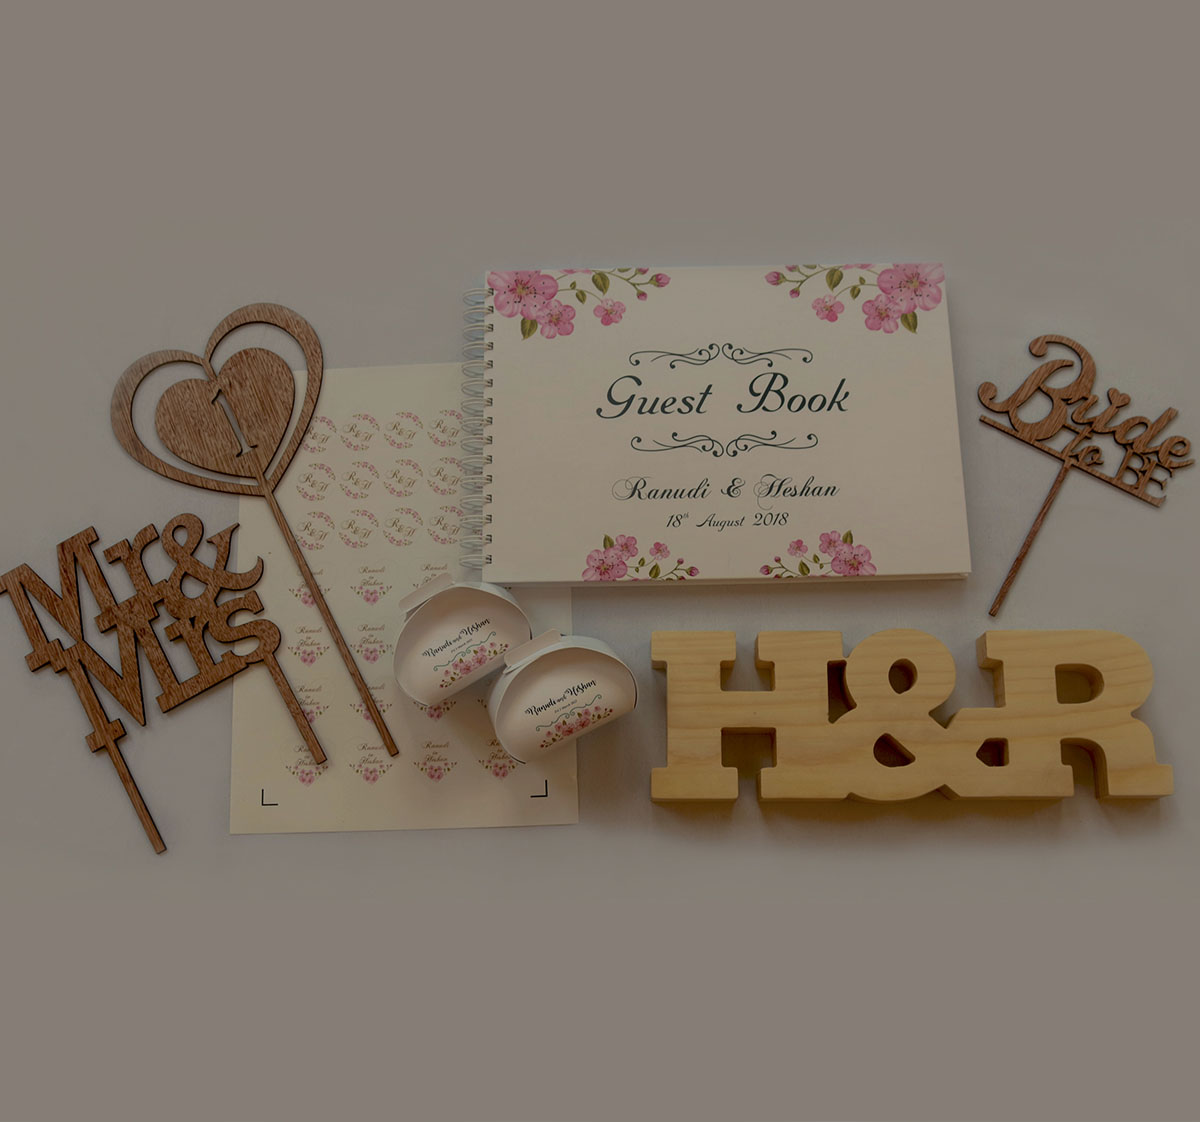 This image contains a cake topper that says Mr. & Mrs, a cake topper that says Bride to Be, a spiralbound wedding guest book, 2 cake boxes, a  wooden table number sign, a table word block that says H&R, and wedding invitation envelope sticker sheet all printed with a floral design.